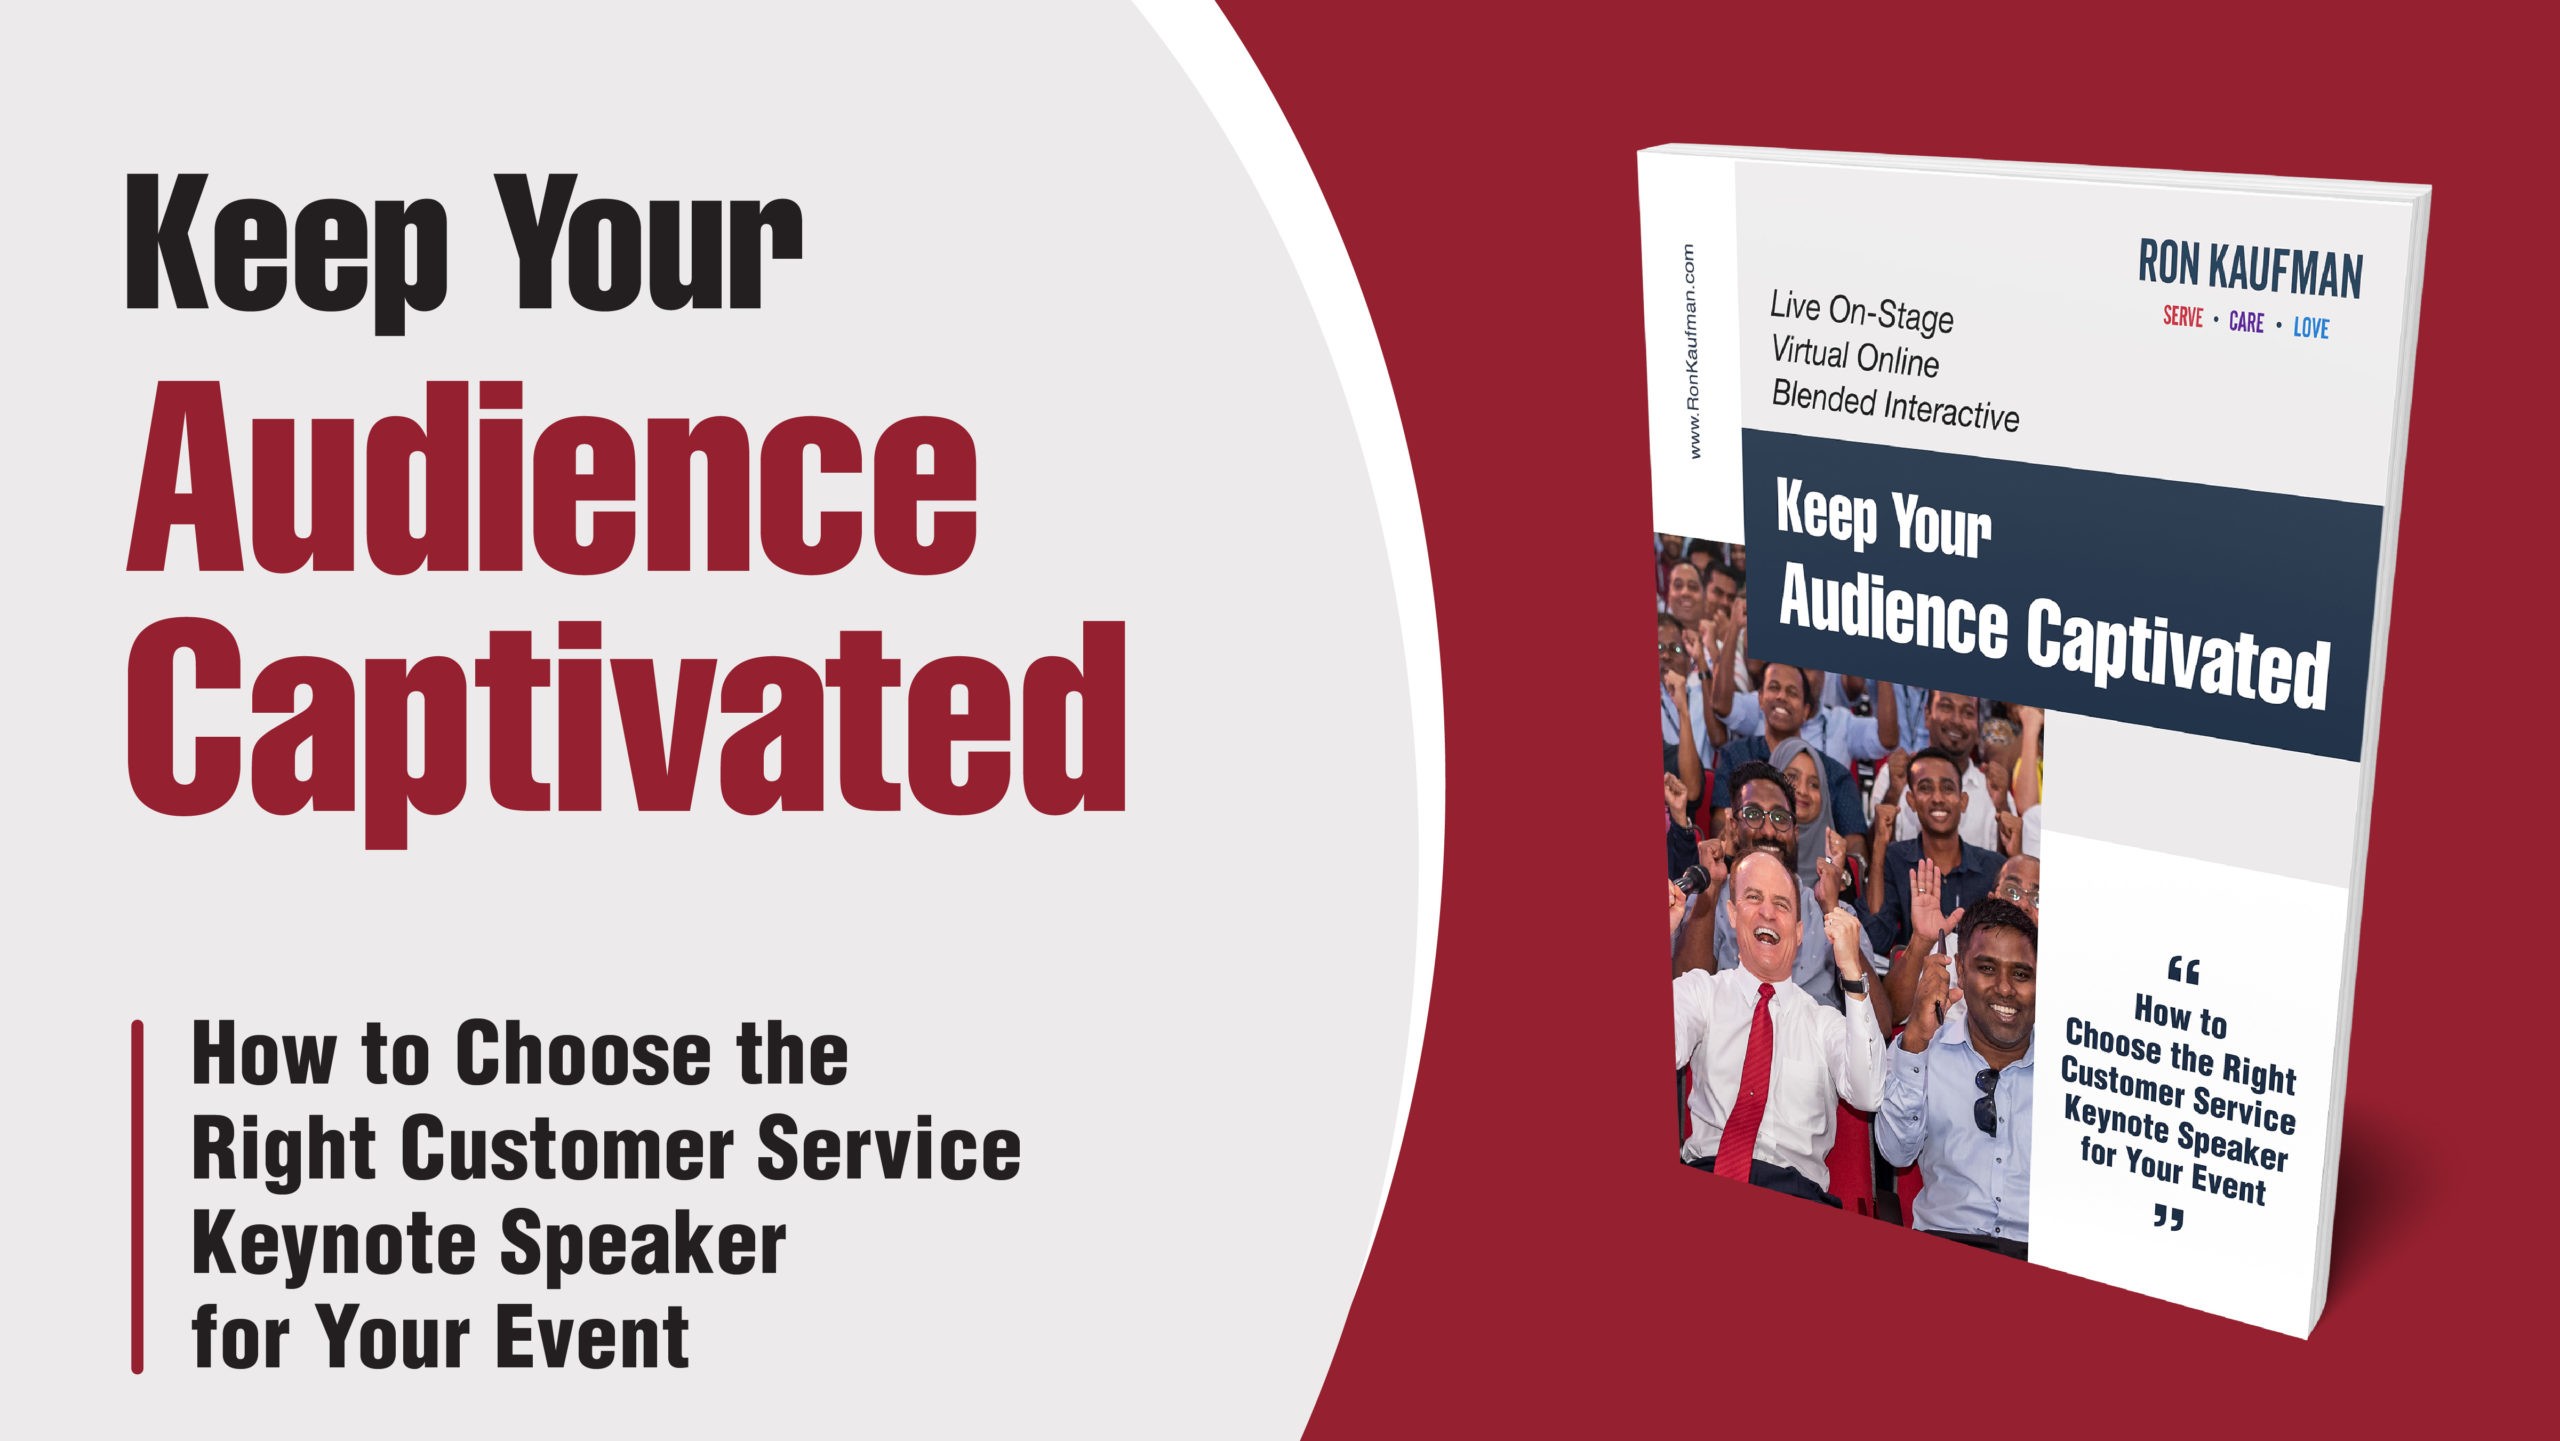 Choose the Right Customer Service Keynote Speaker for your event